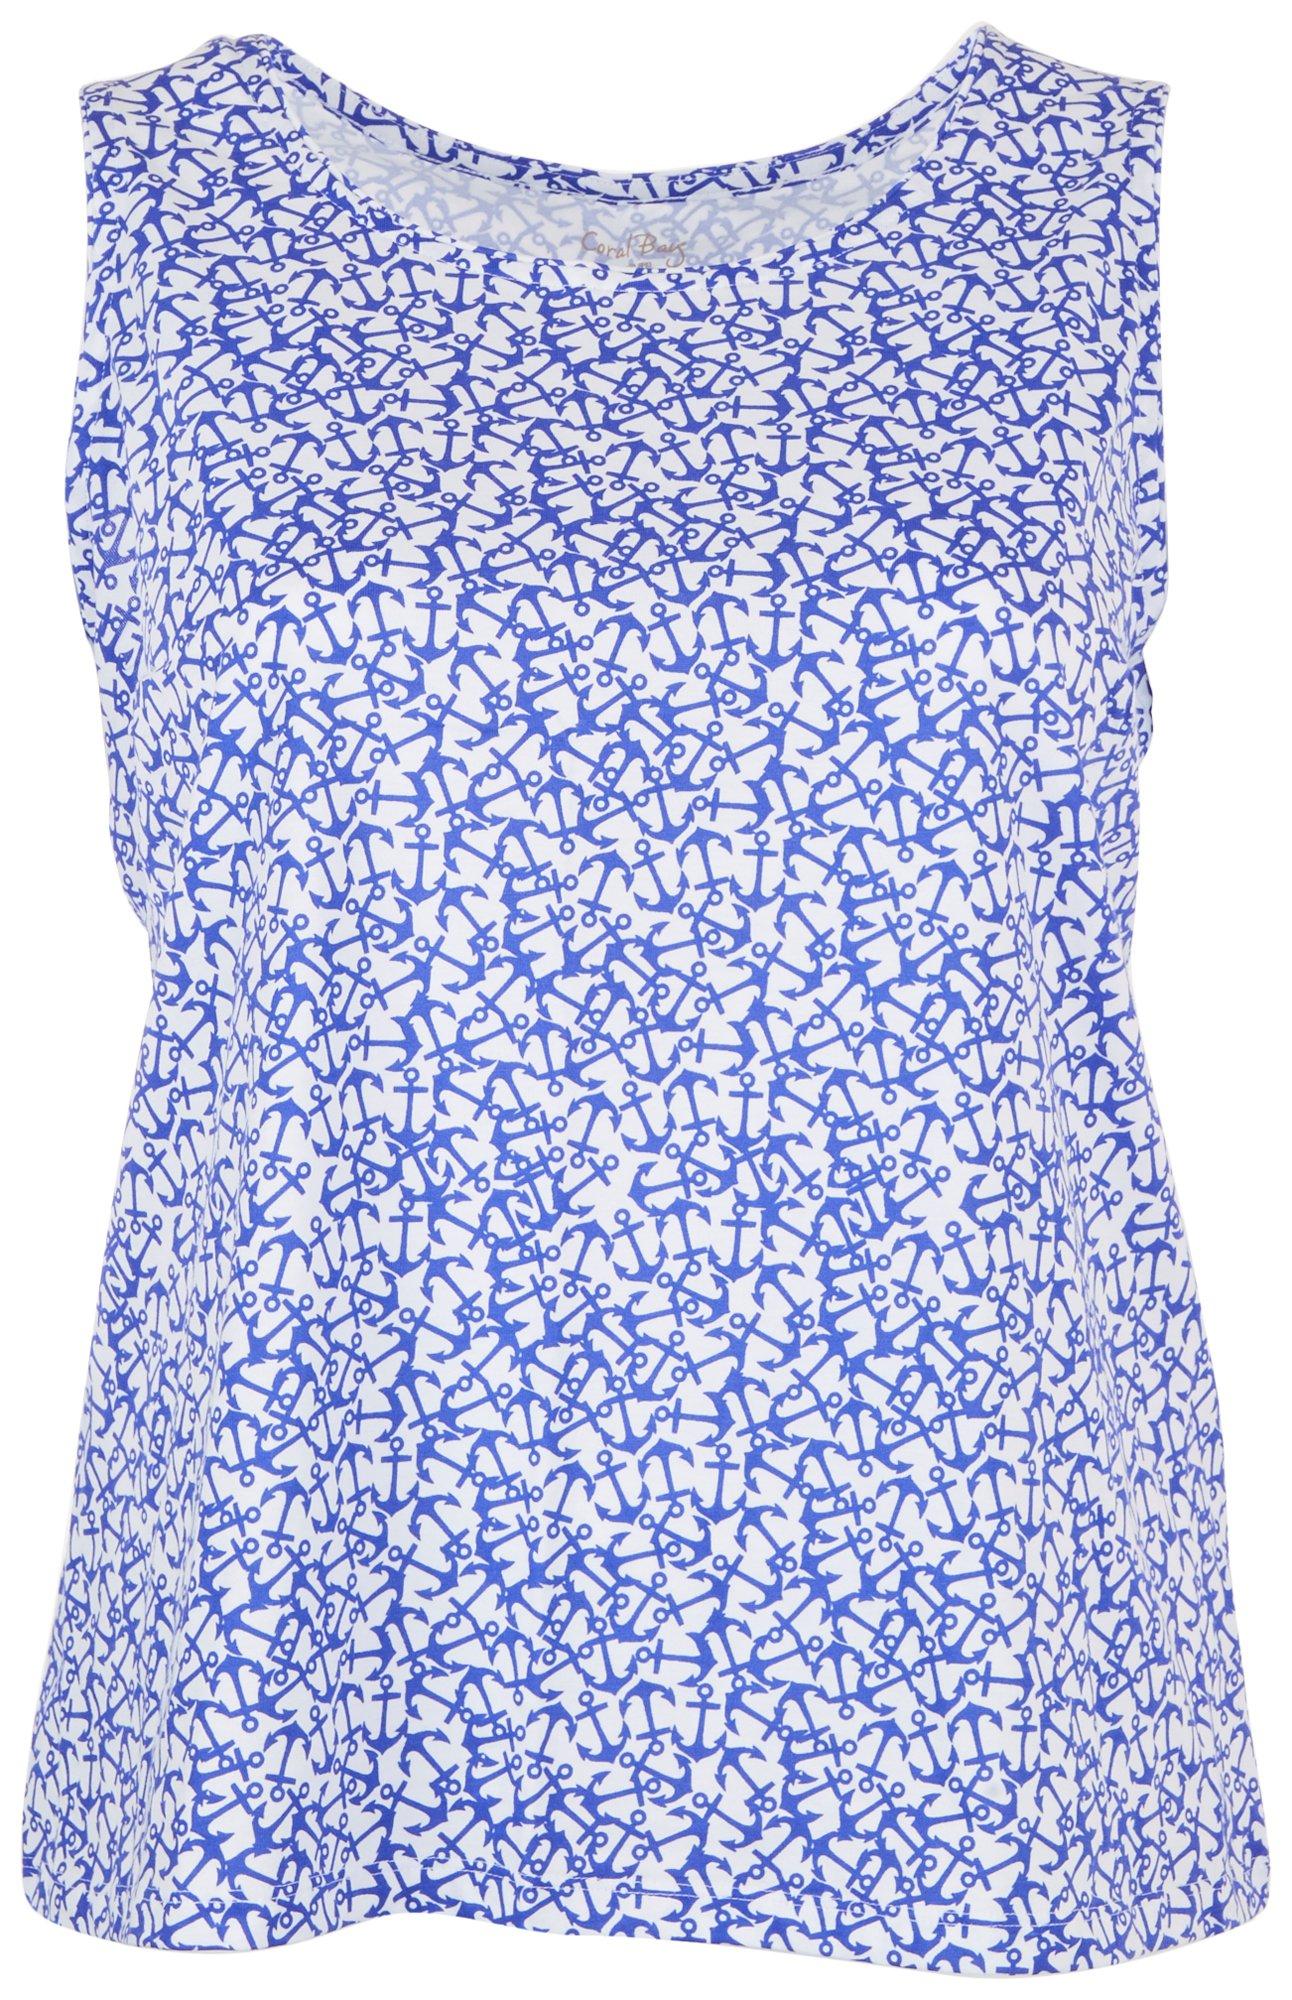 Coral Bay Plus Anchors Away Short Sleeve Top